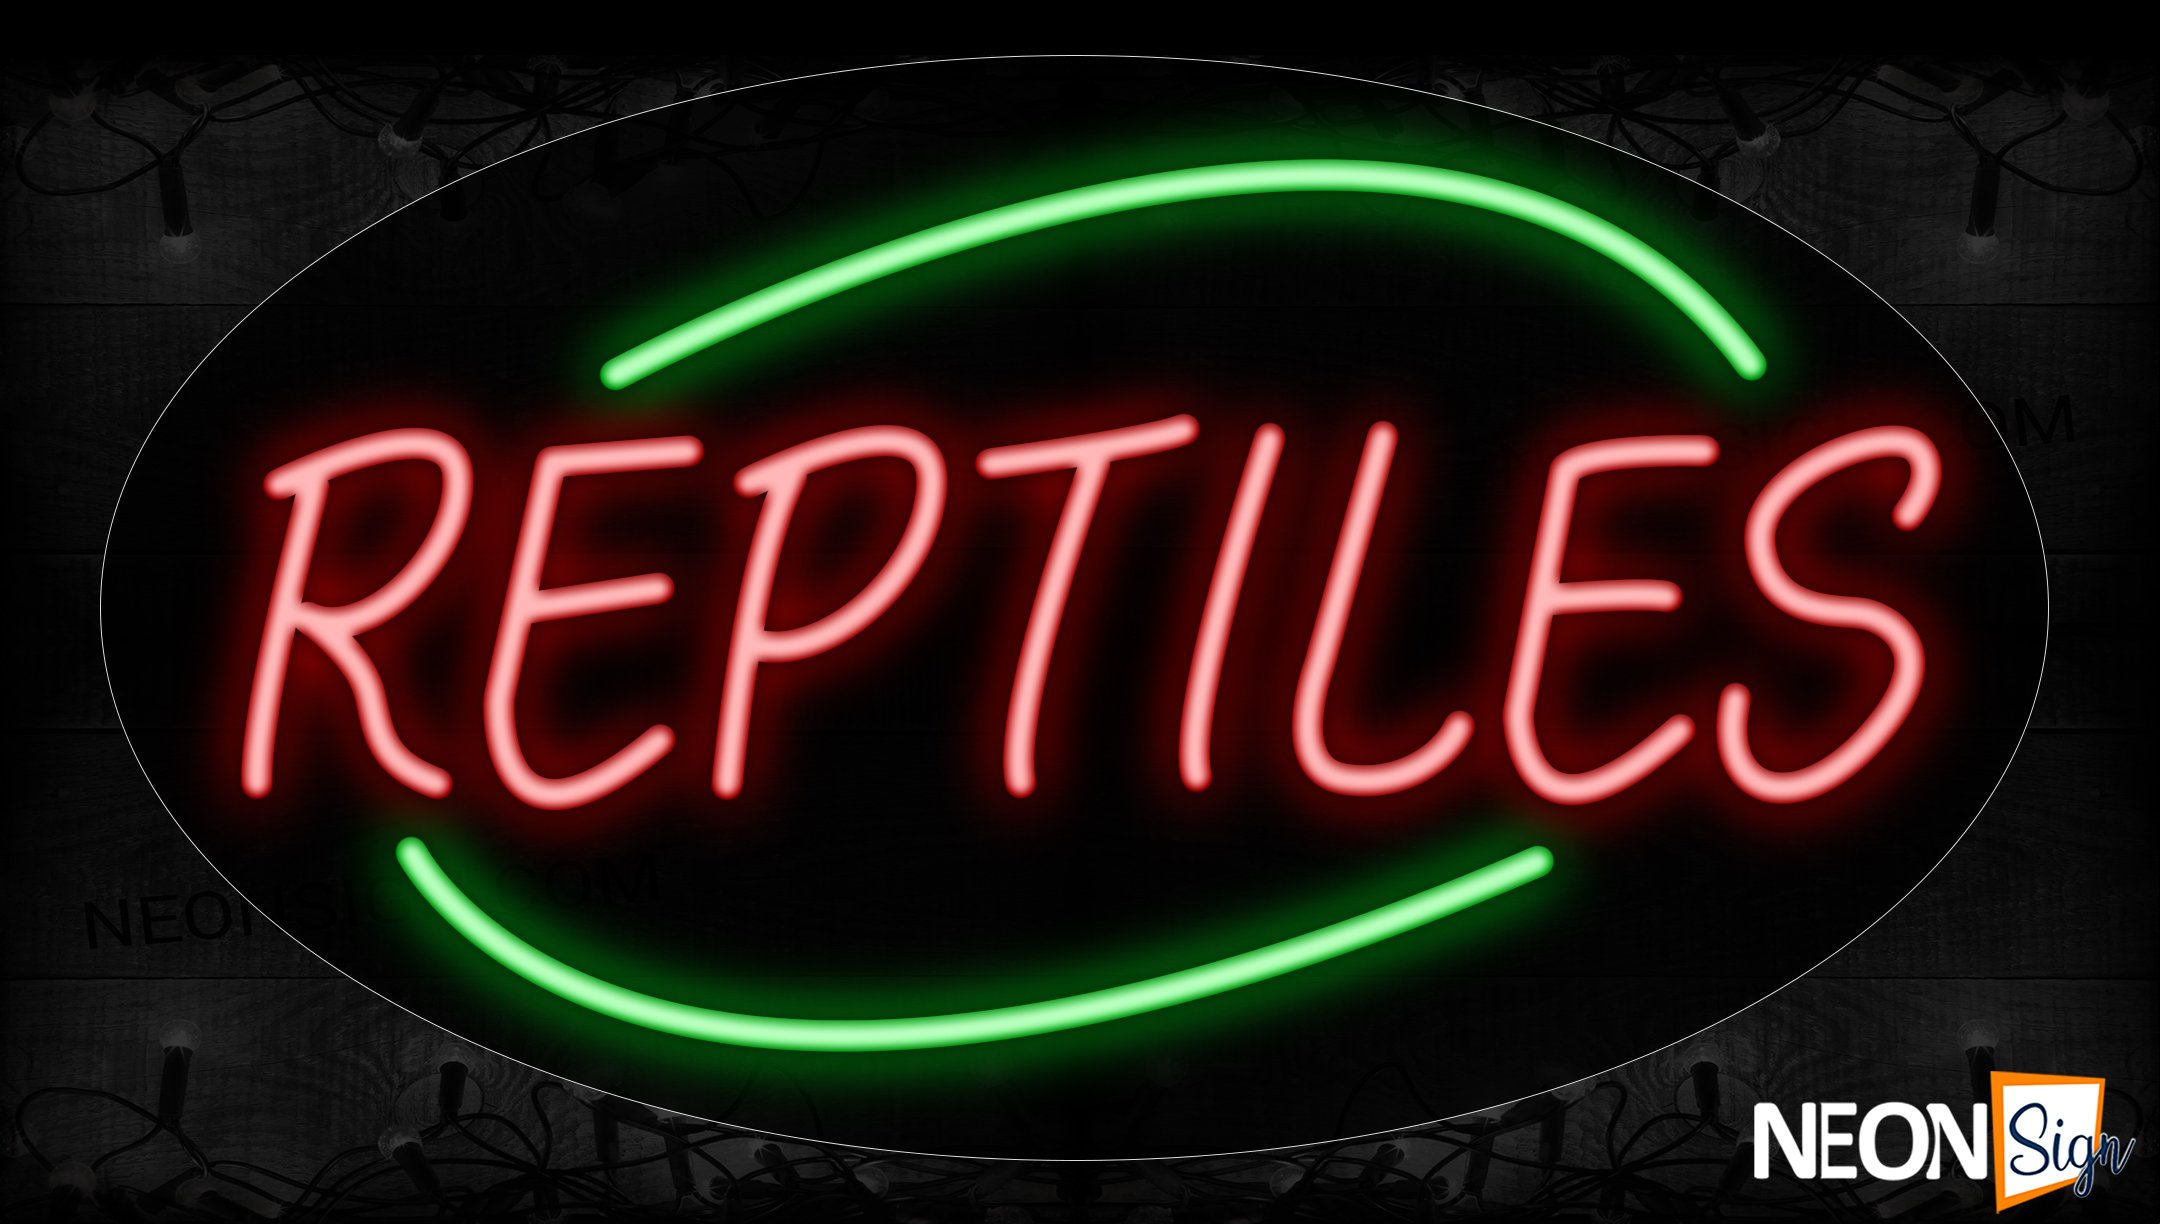 Image of 14641 Reptiles In Red With Green Arc Border Neon Sign_17x30 Contoured Black Backing